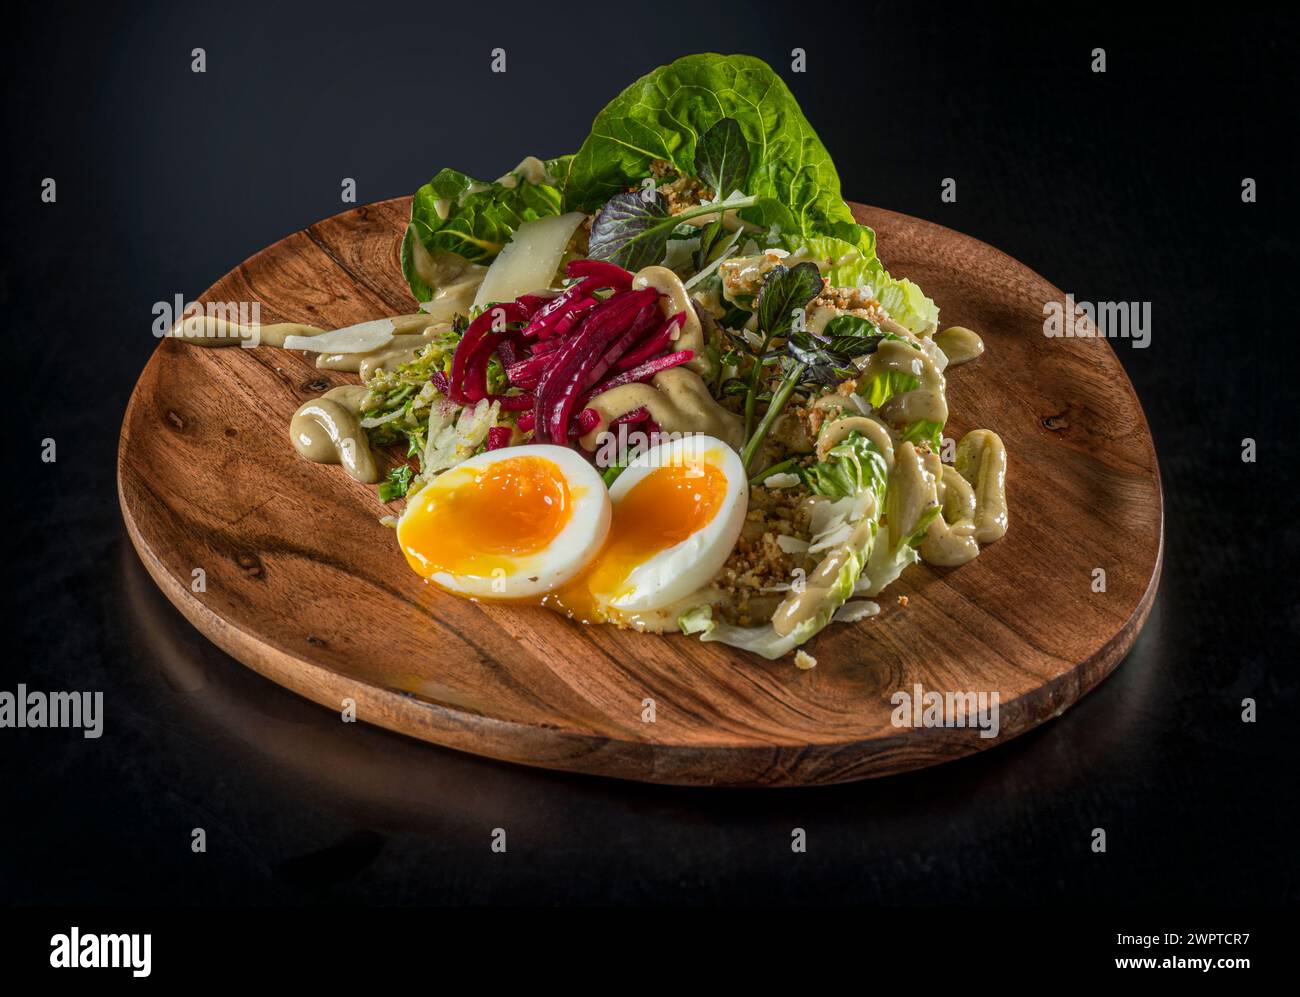 Salad on wooden plate with soft boiled egg Stock Photo